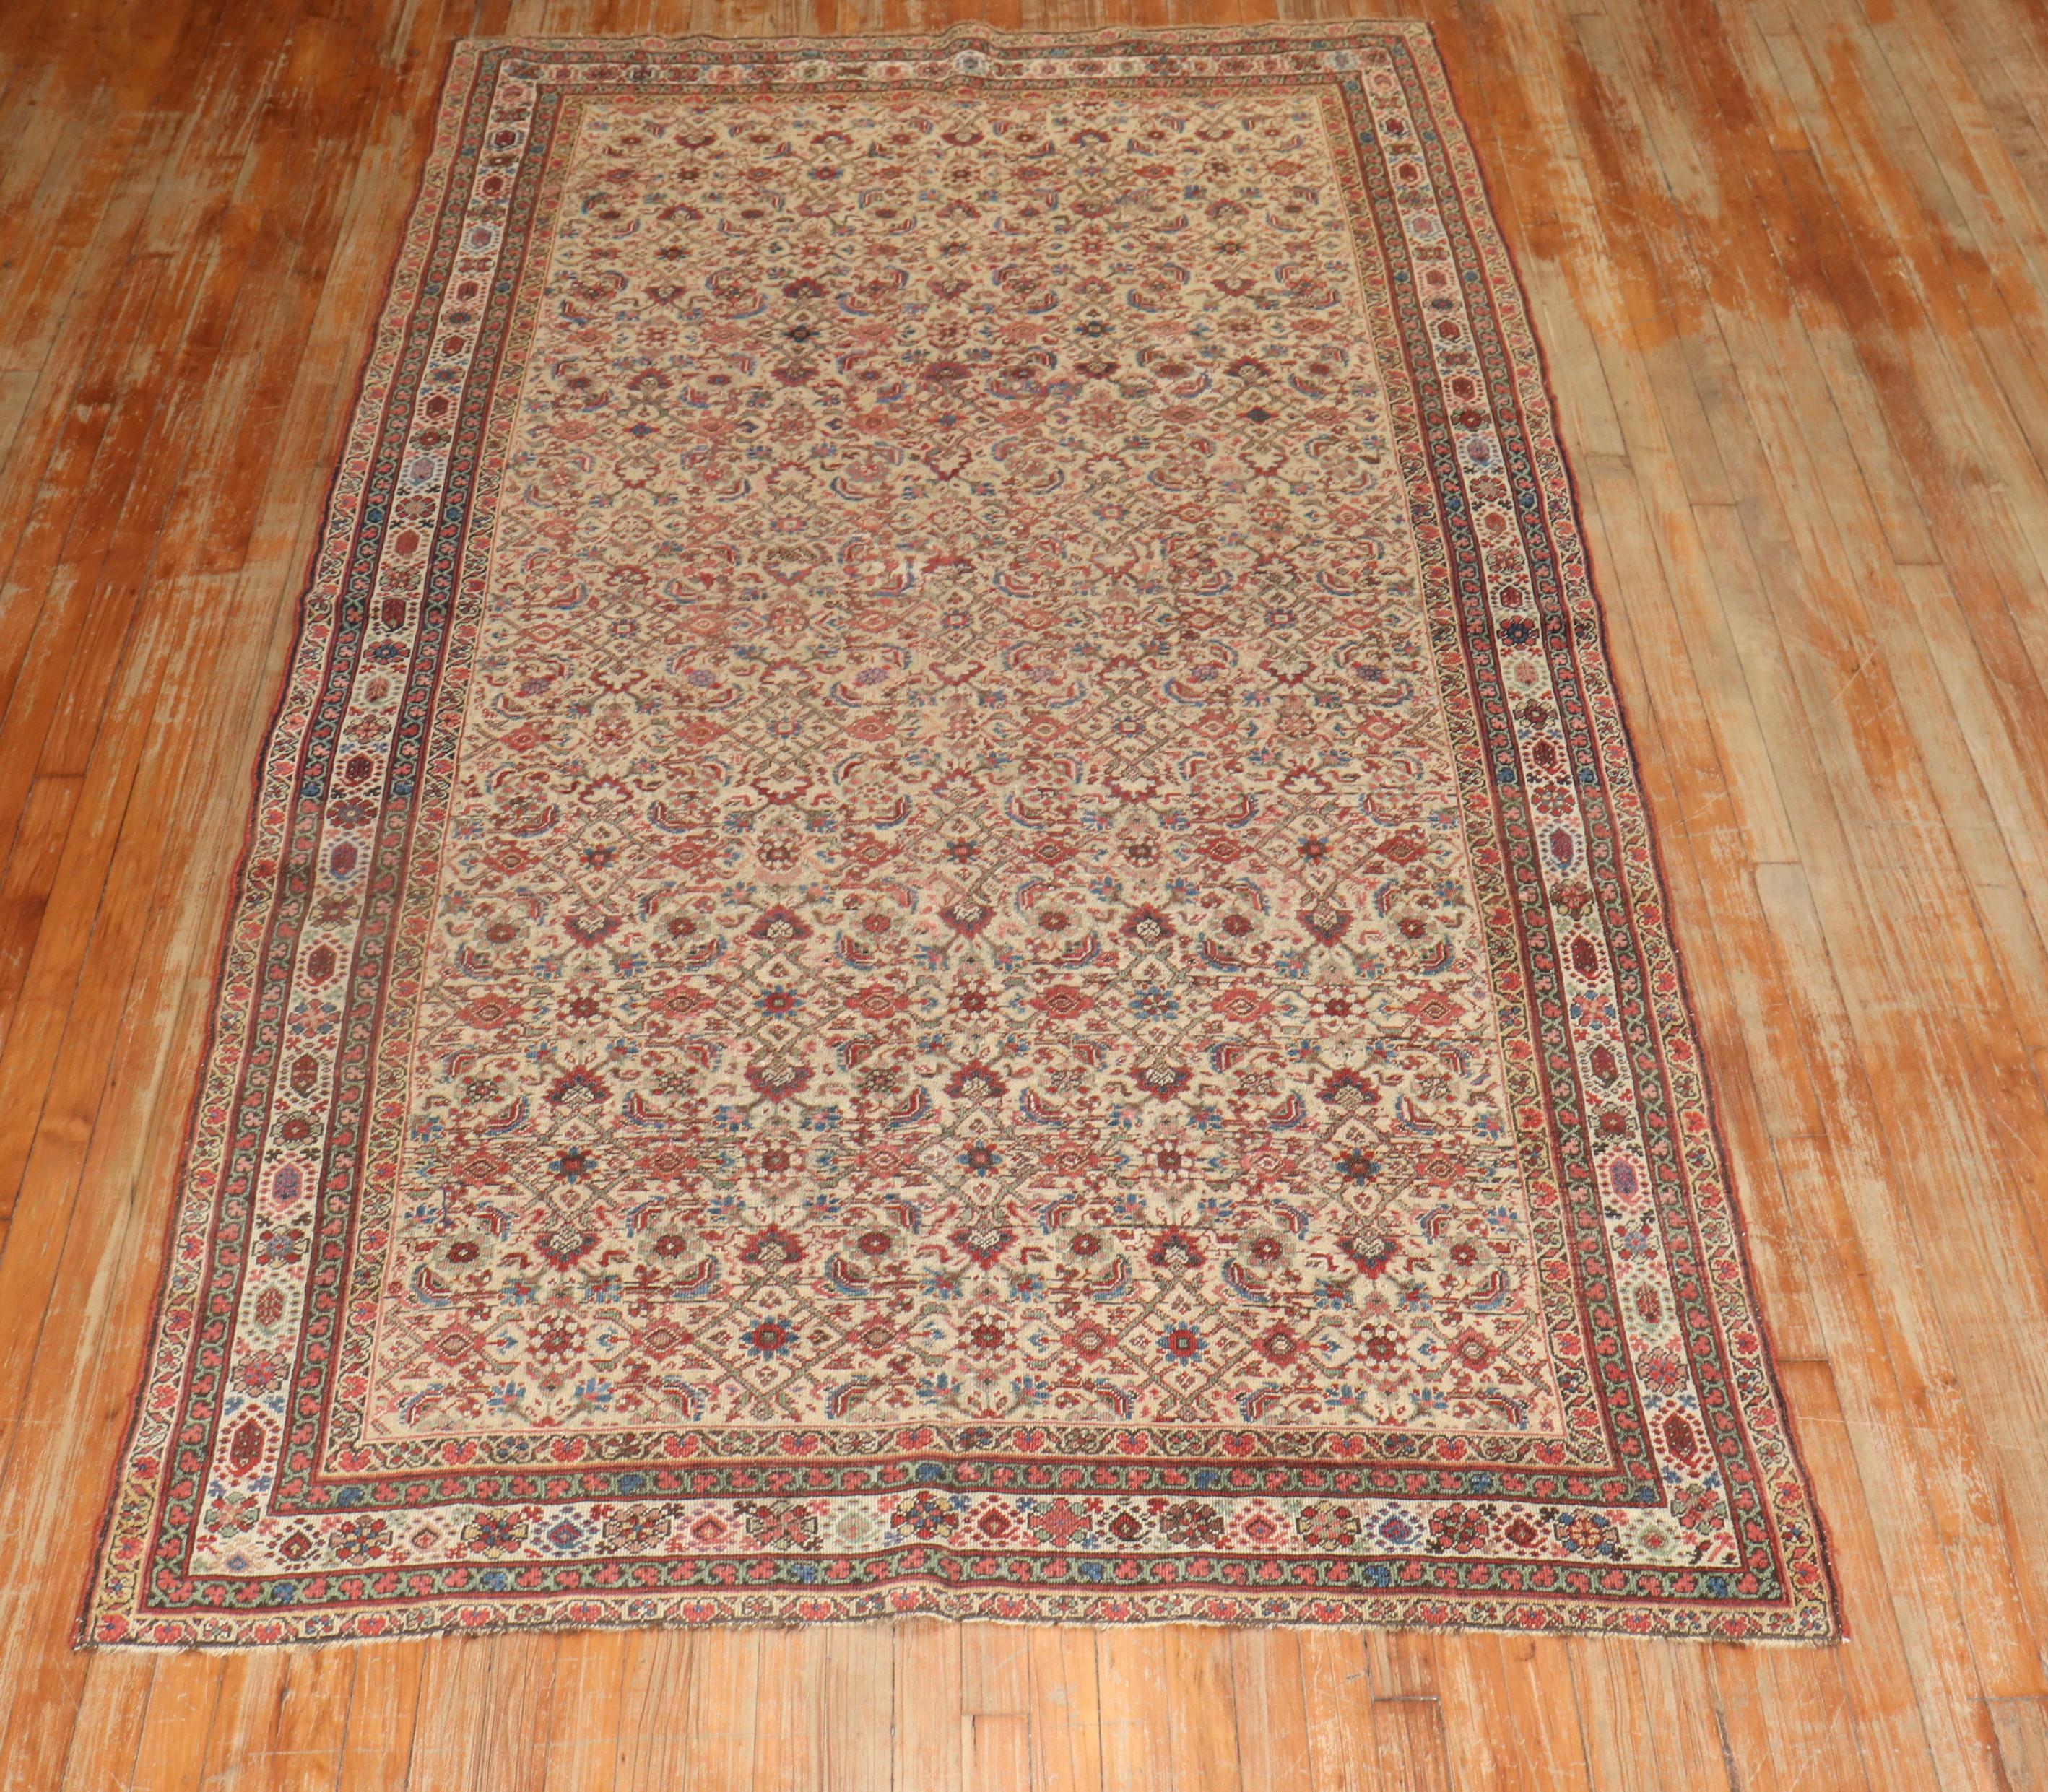 Classic Herati design Persian Malayer gallery rug. Ivory field, with accents in green, mustard, blue, brown, terracotta.

Measures: 5'1